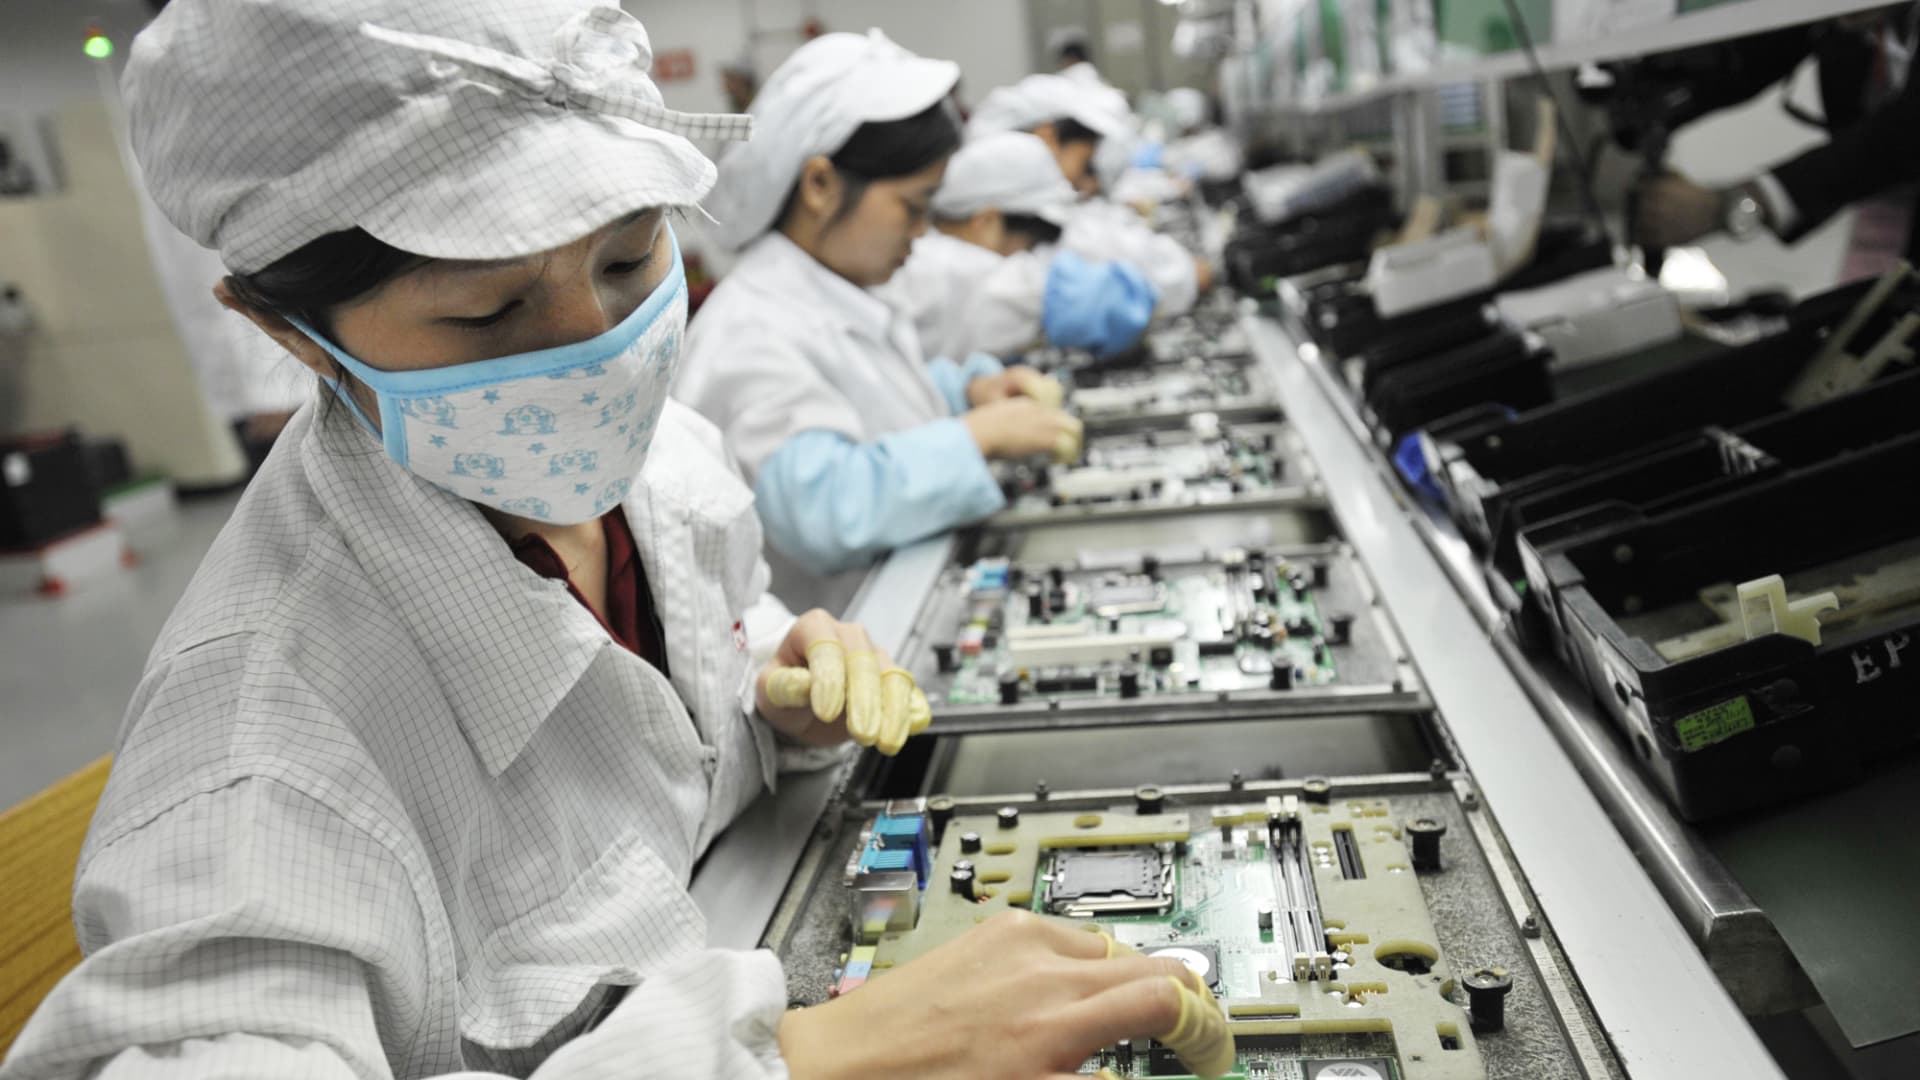 Workers in the Foxconn factory in Shenzhen, China.